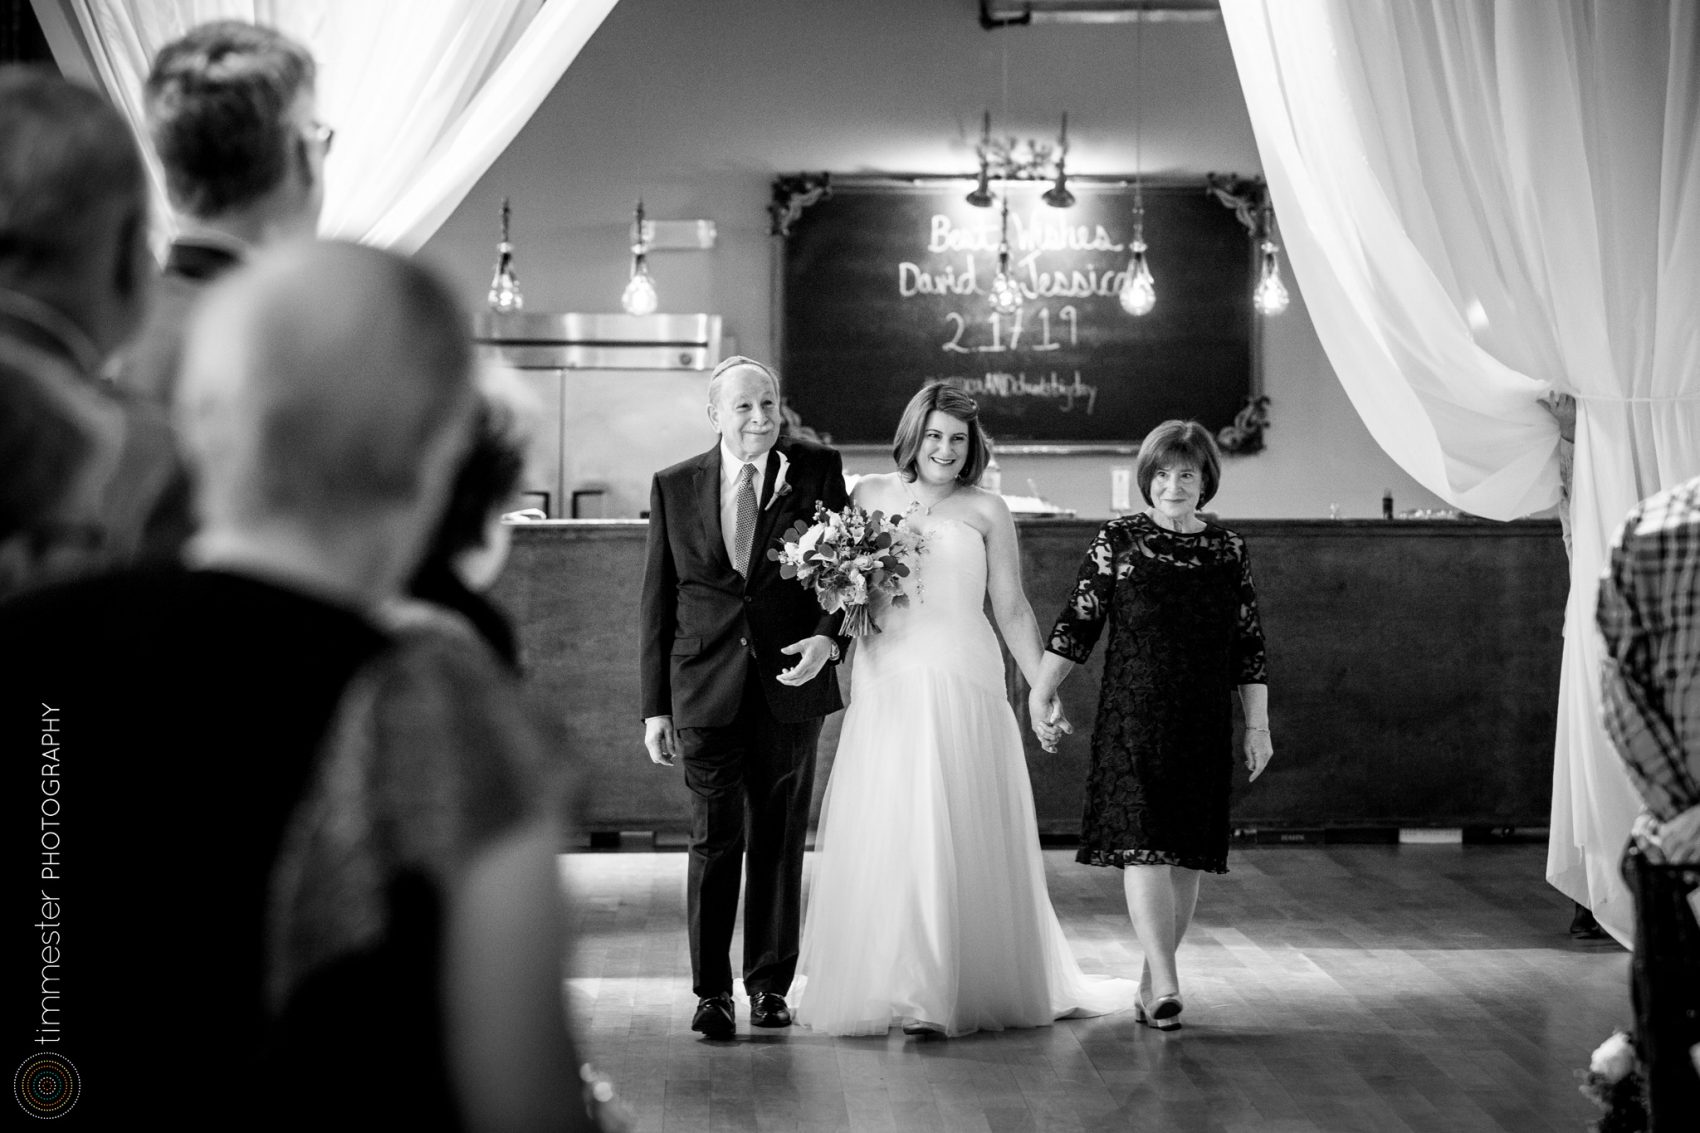 The wedding ceremony of Jessica + David at The Cotton Room in Durham.